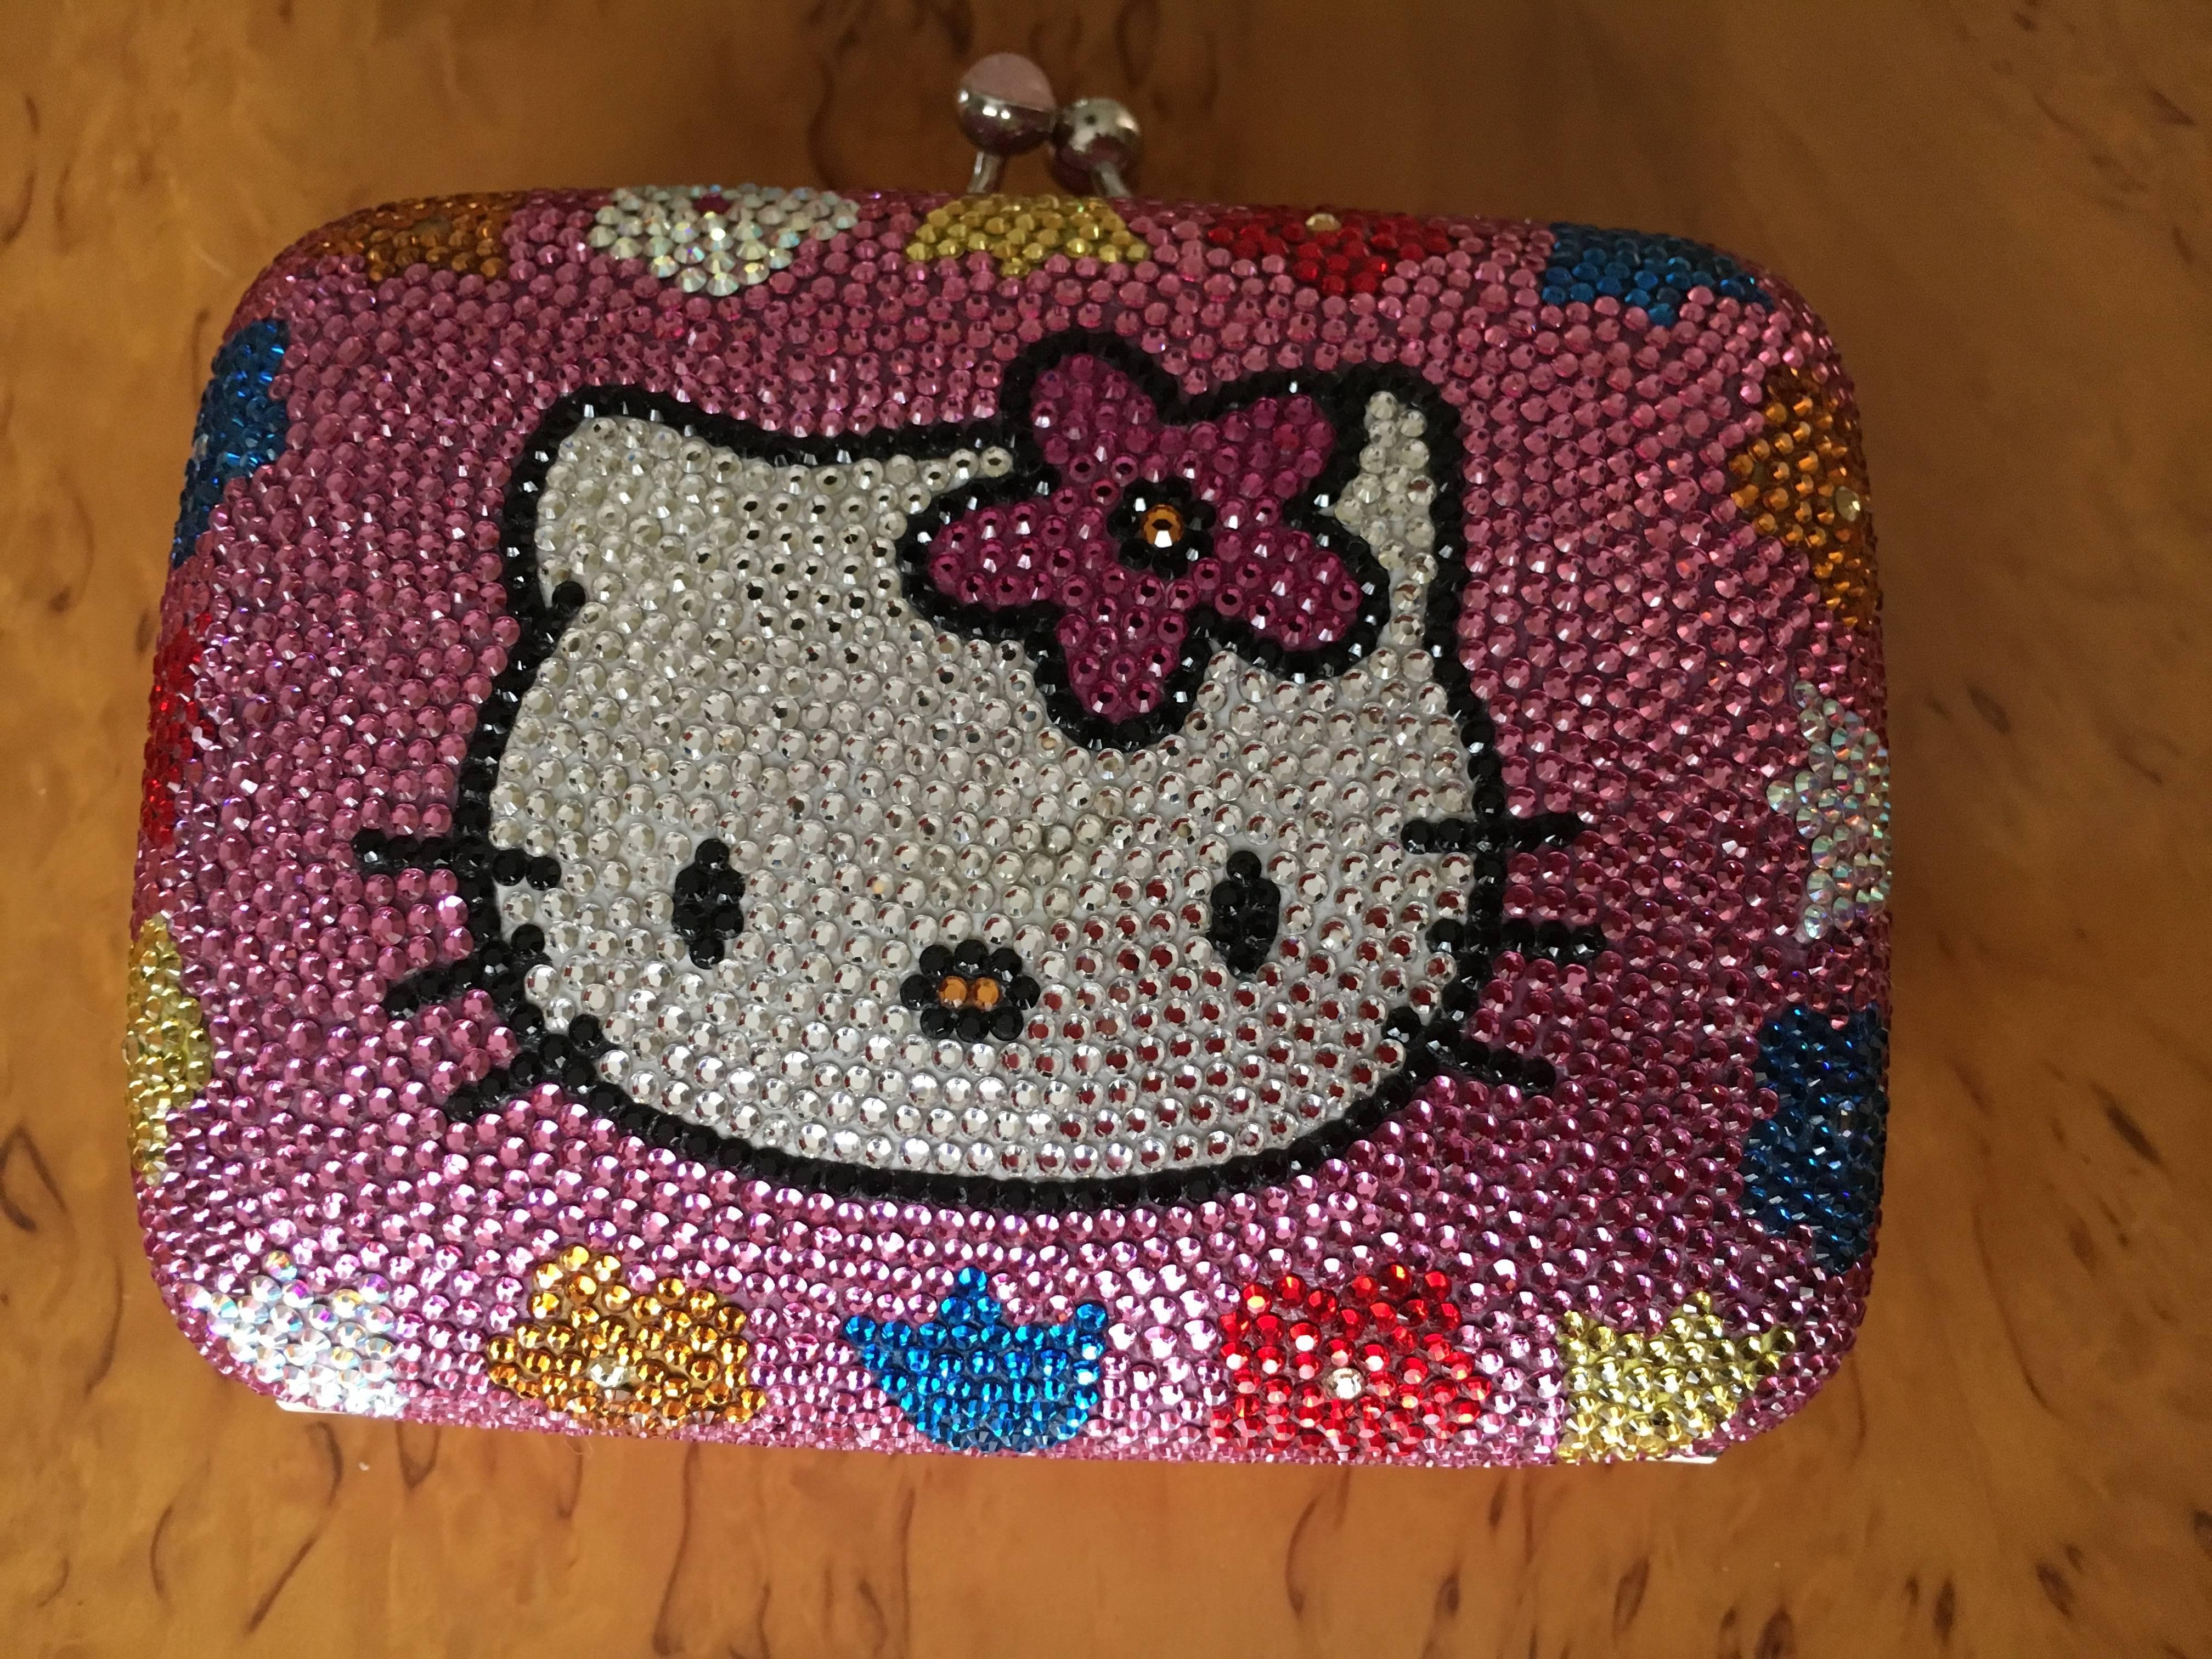 Delightful collaboration between Judith Leiber and Sanrio resulted in this mini minaudière .
4" x 3.5
Excellent condition